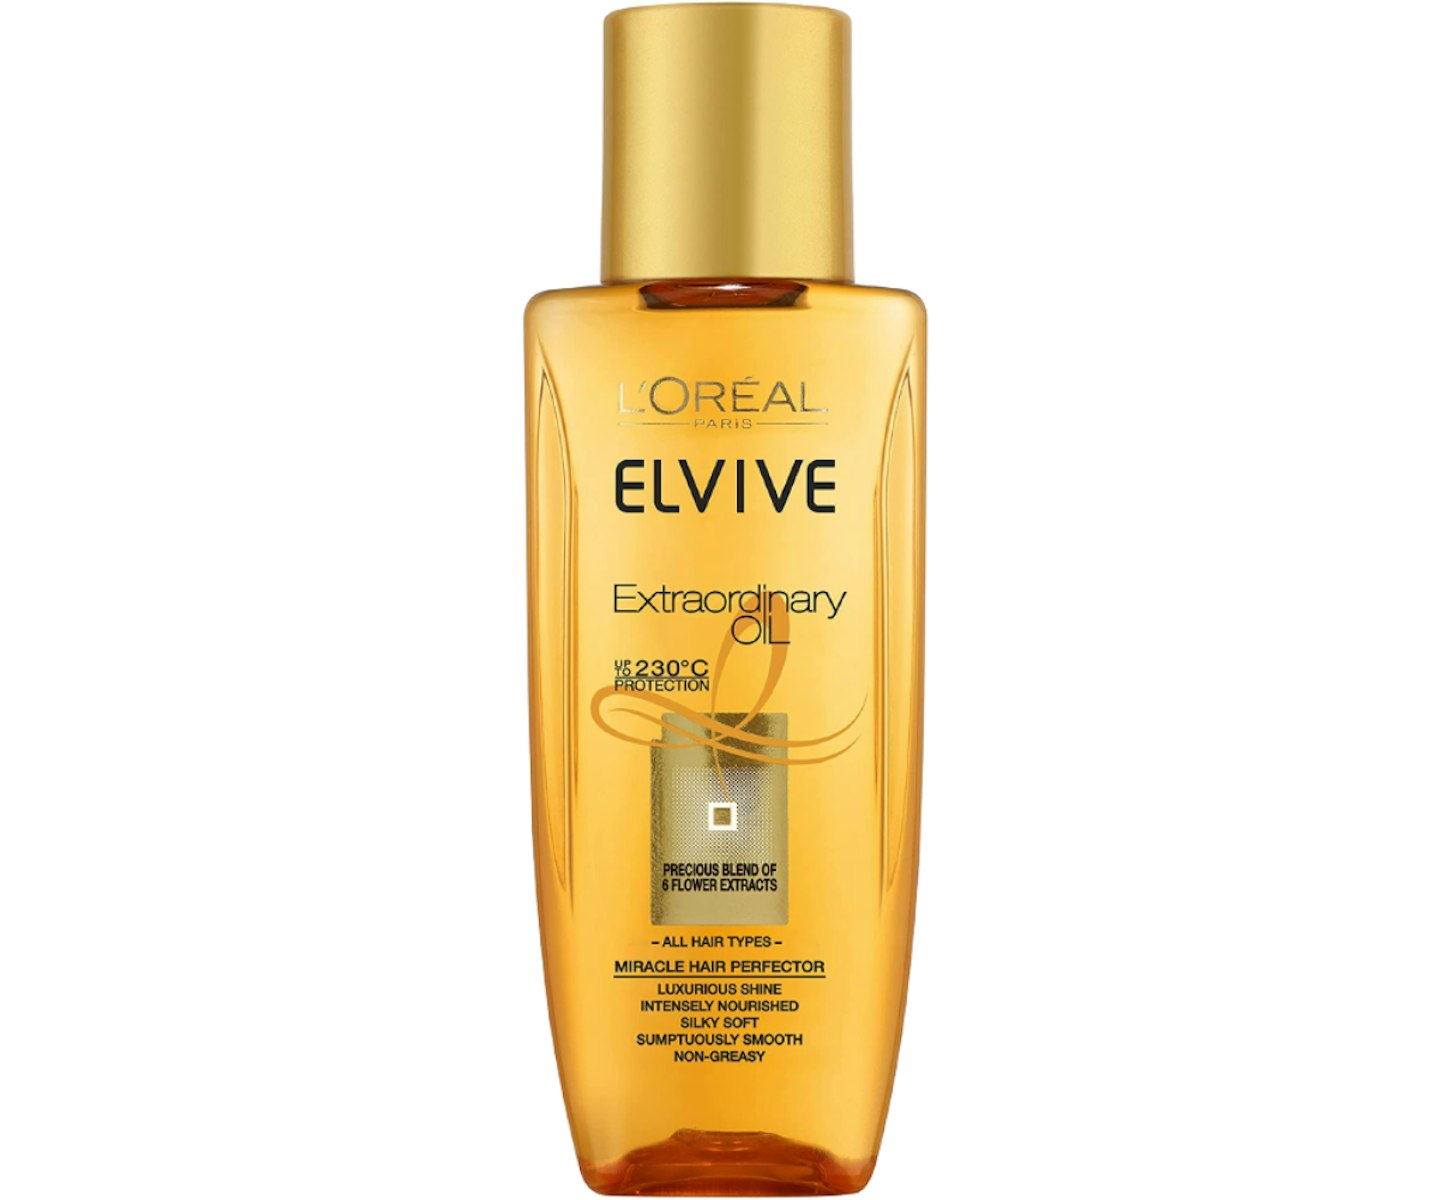 A picture of the L'Oreal Elvive Extraordinary Oil